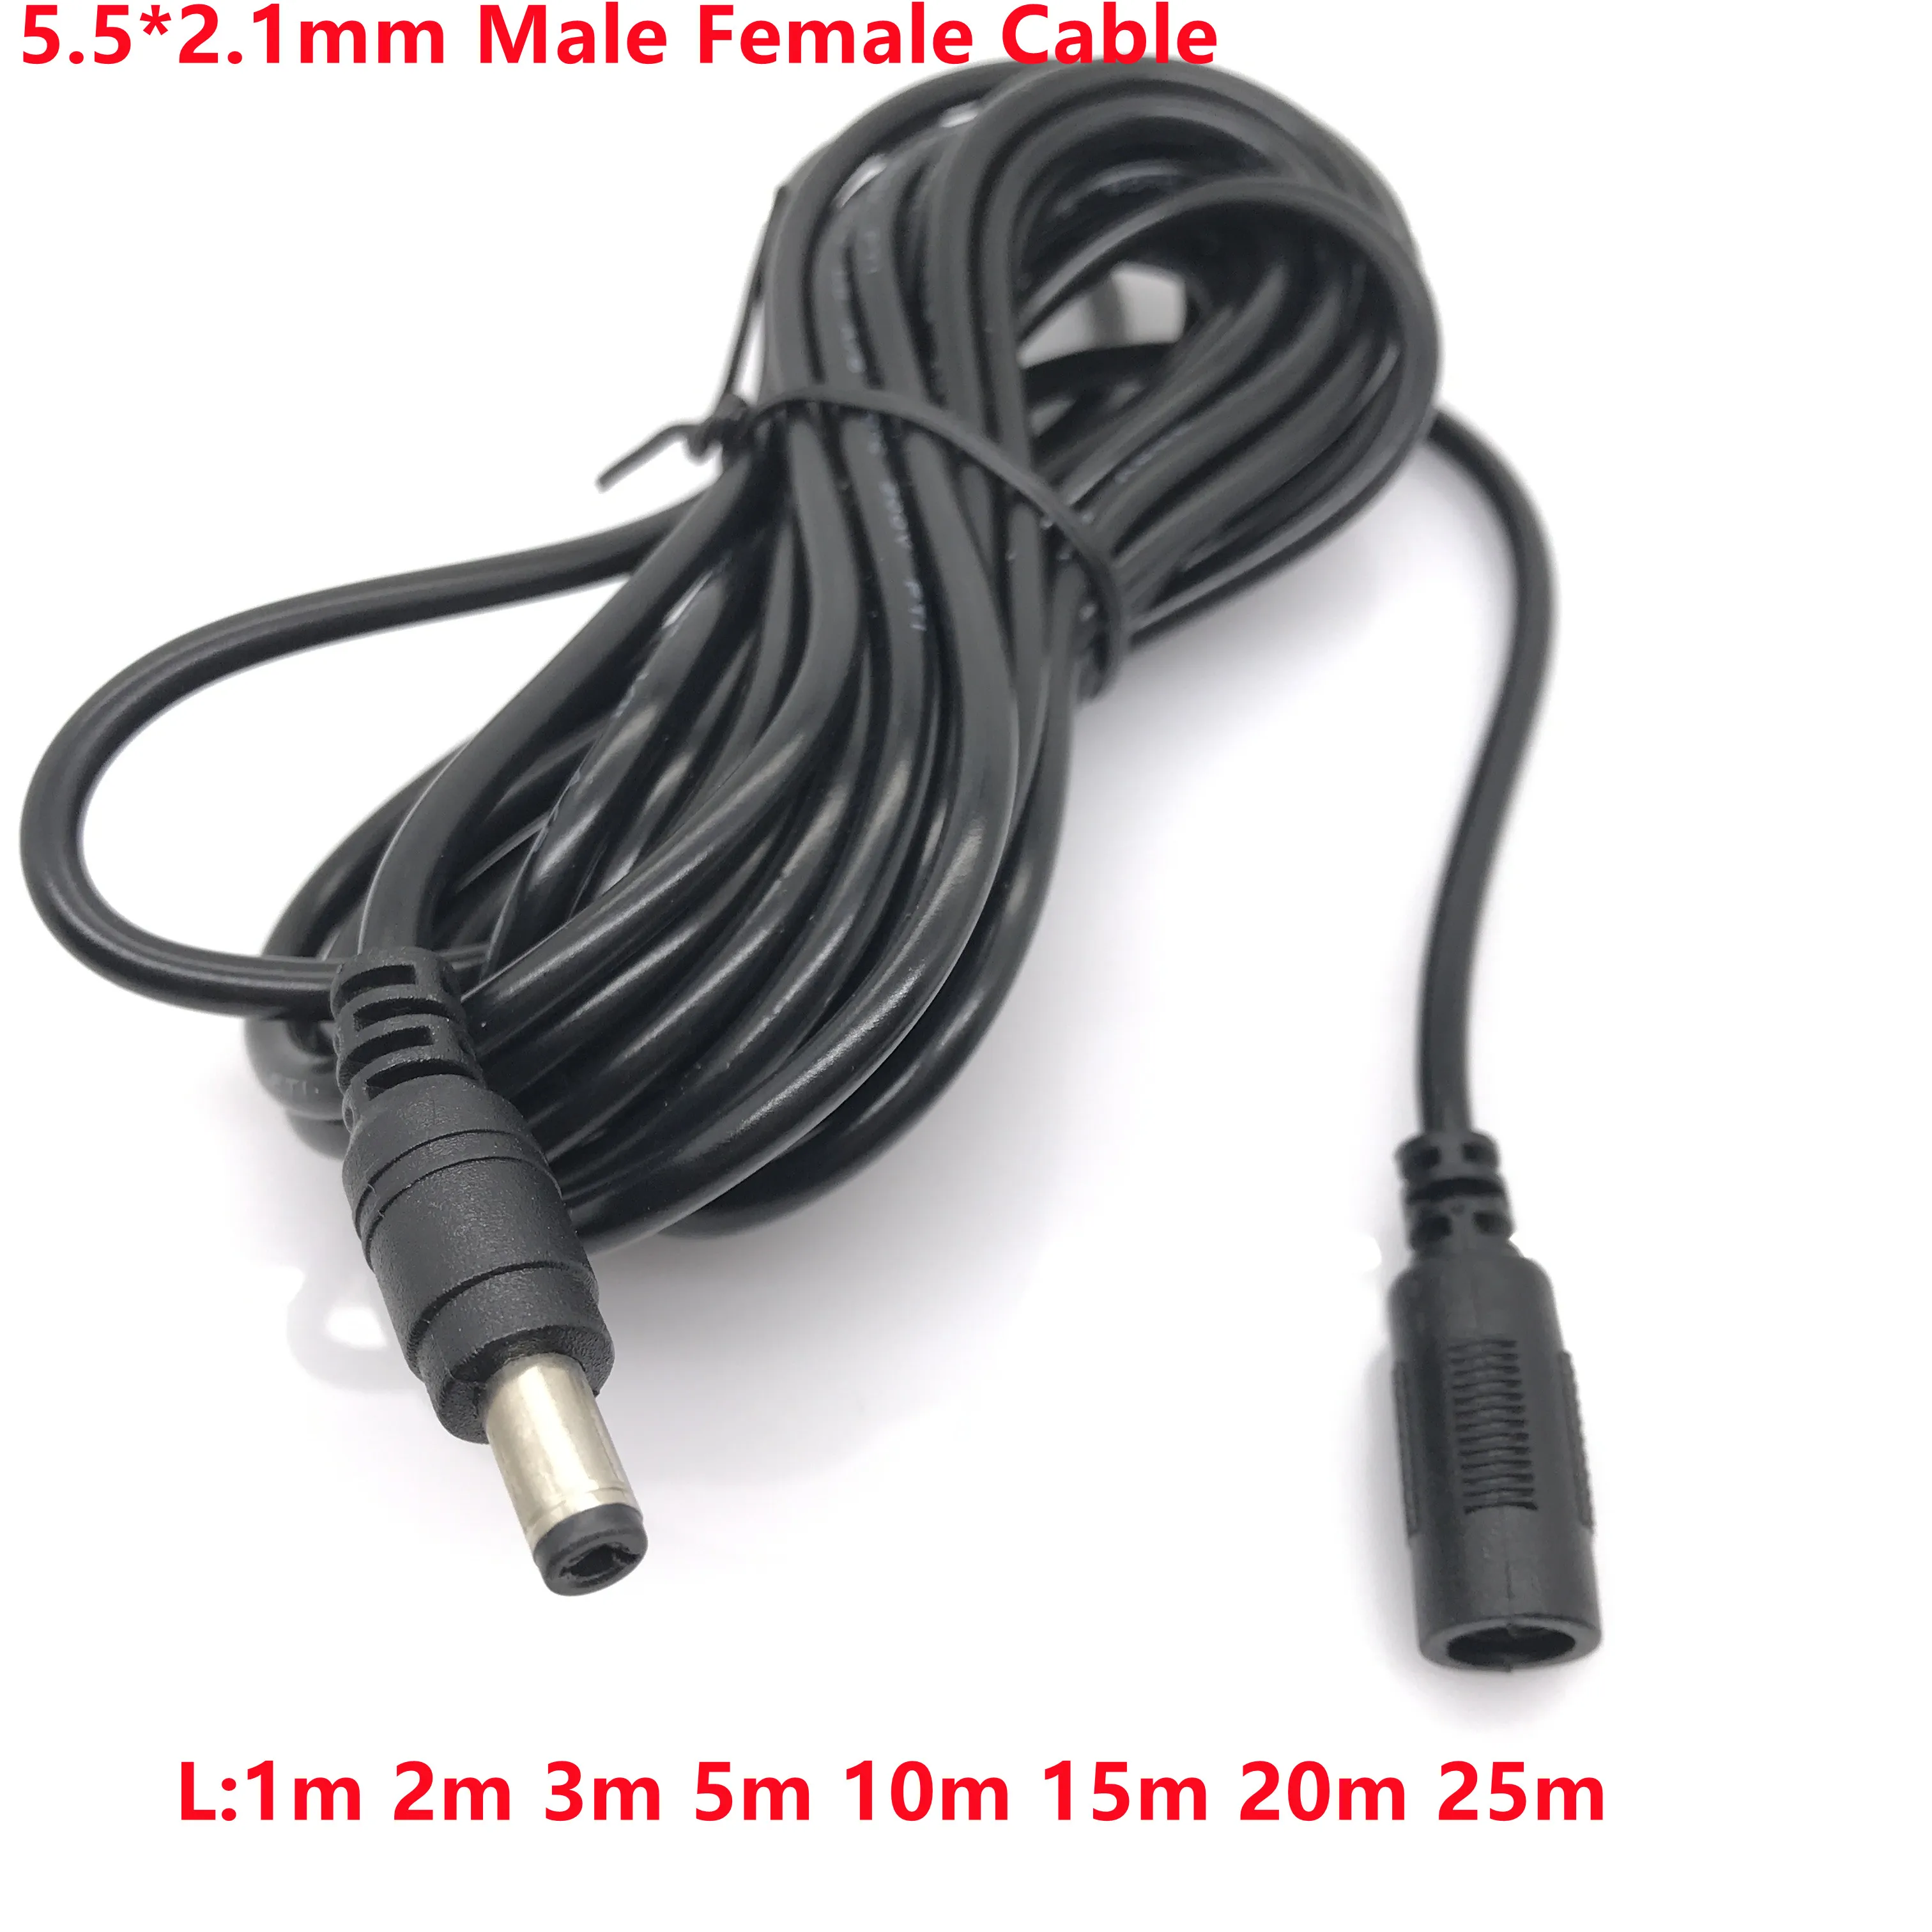 

12V Extension Cable 5.5*2.1mm Male Female Power Cord 1M 2M 3M 5M 10M DC Connector for LED Strip Light Adapter CCTV Camera